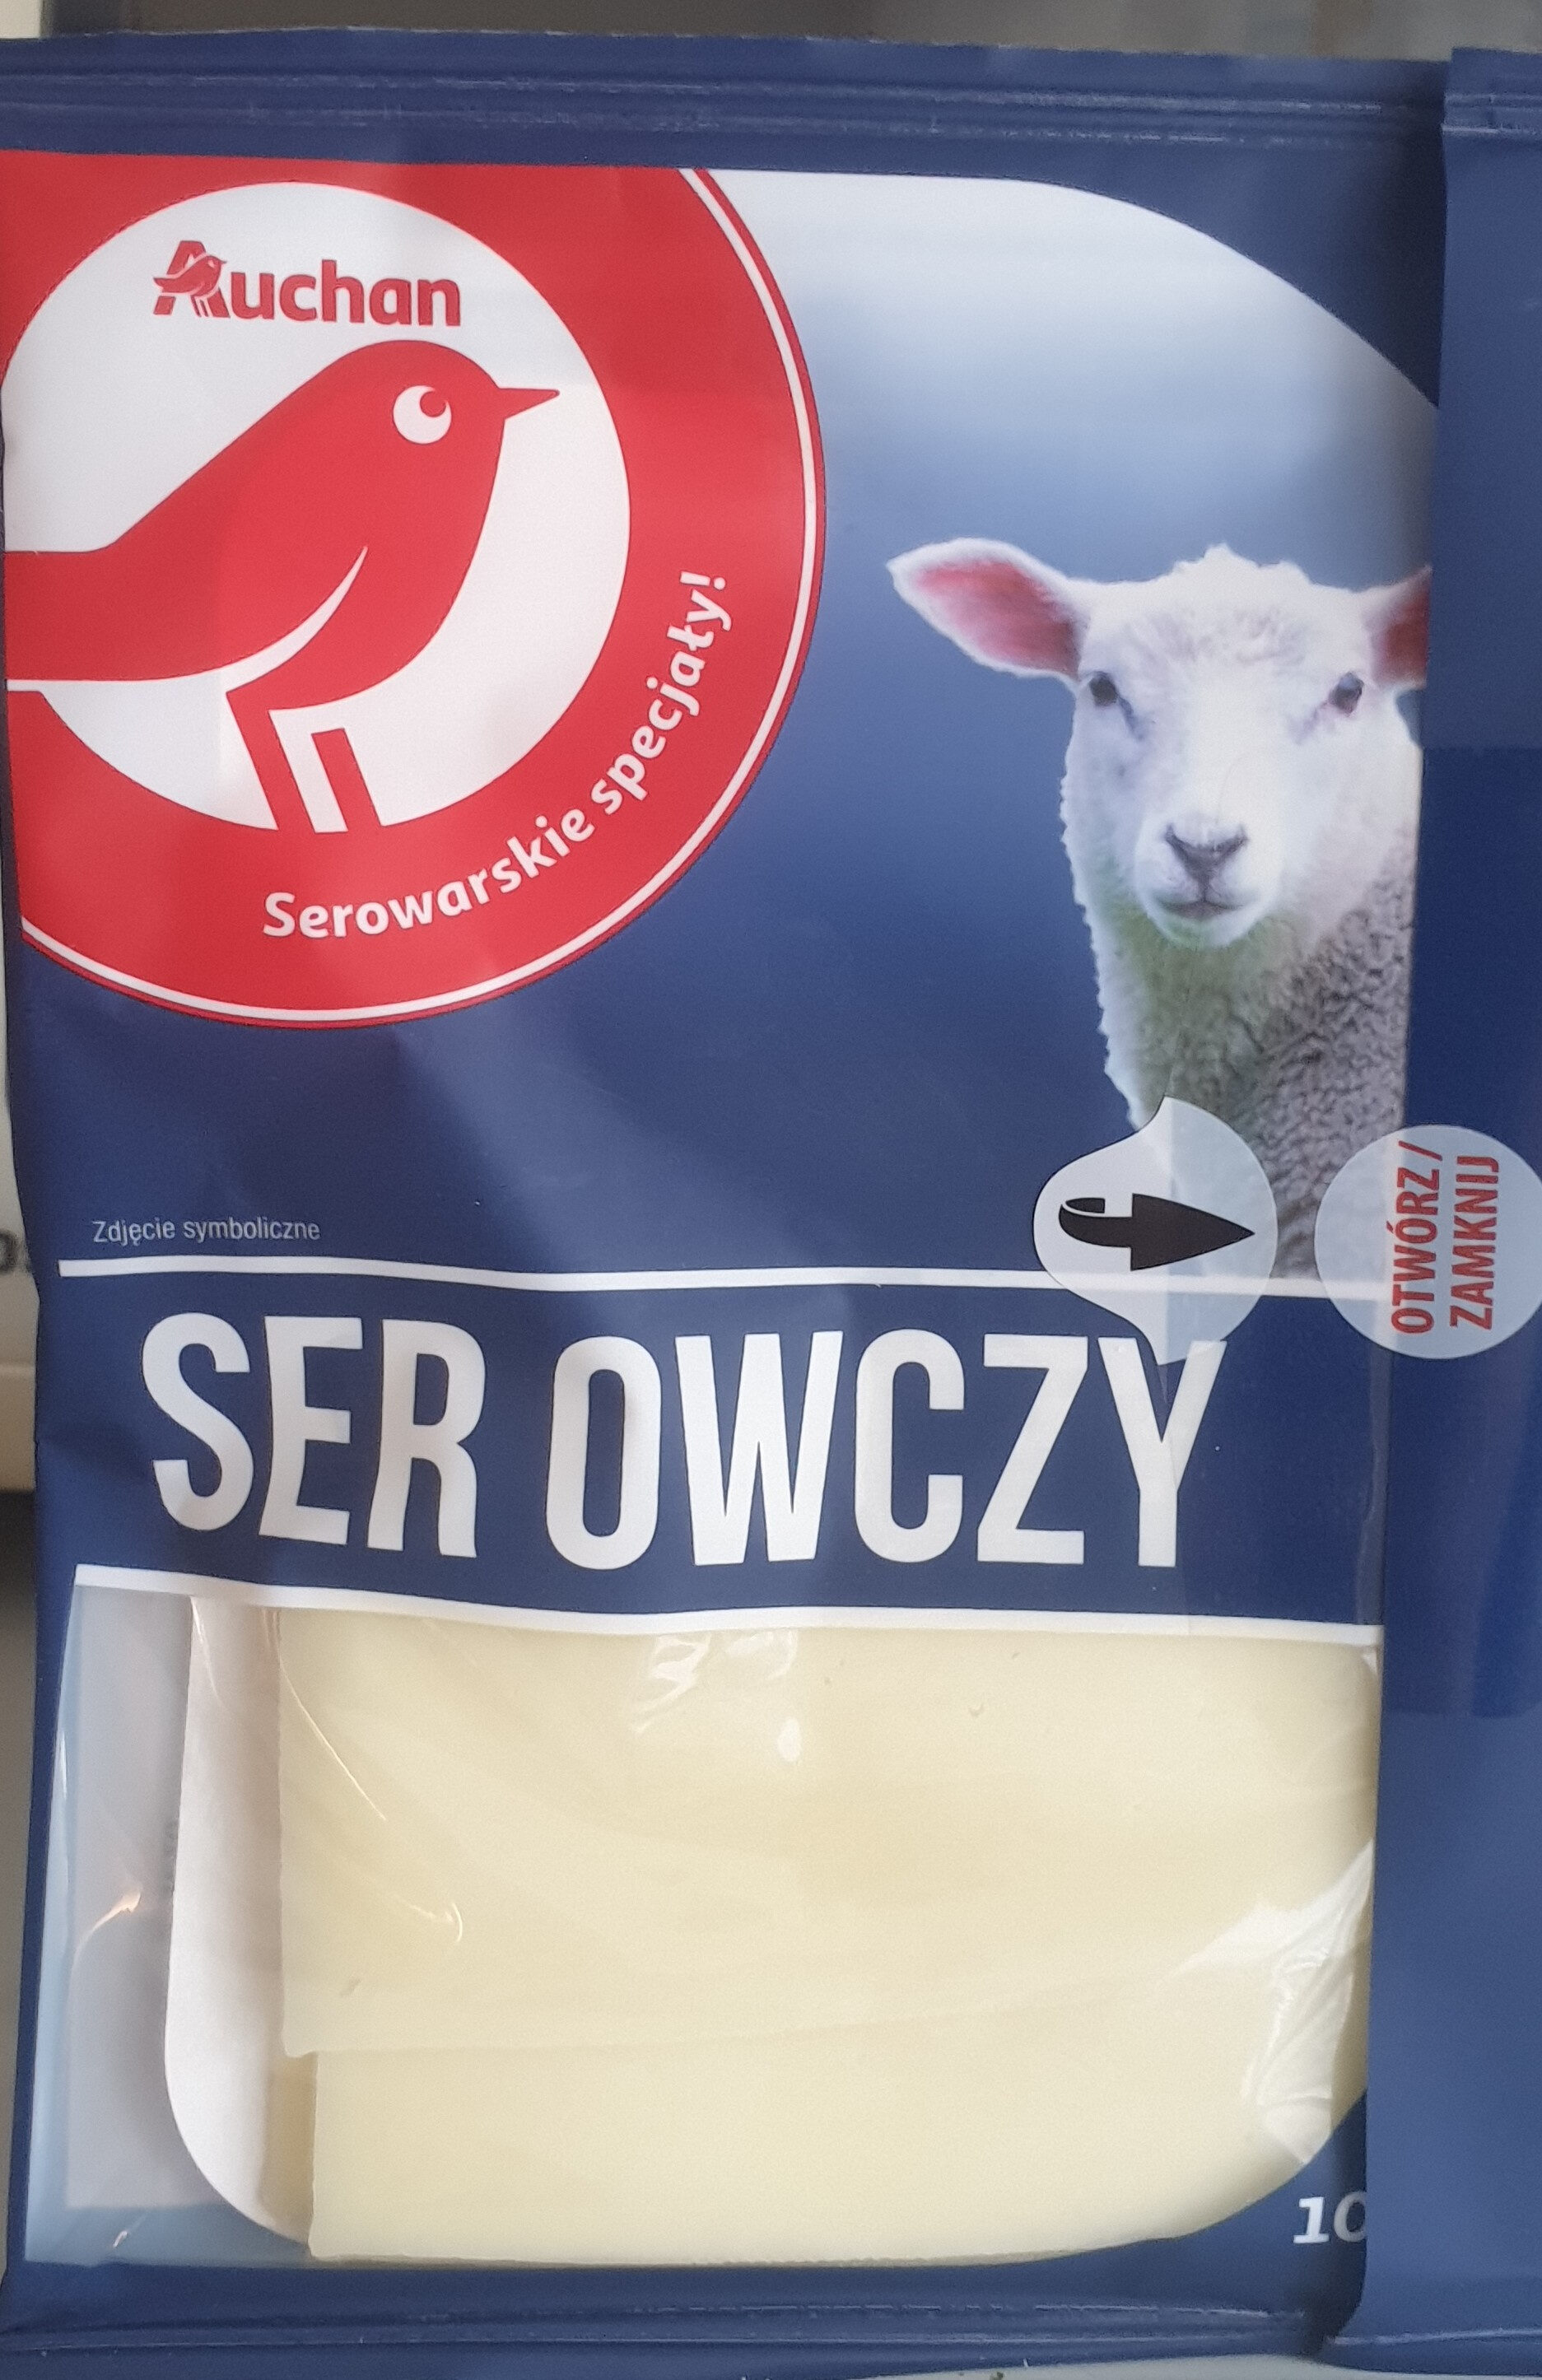 Ser owczy - Product - pl